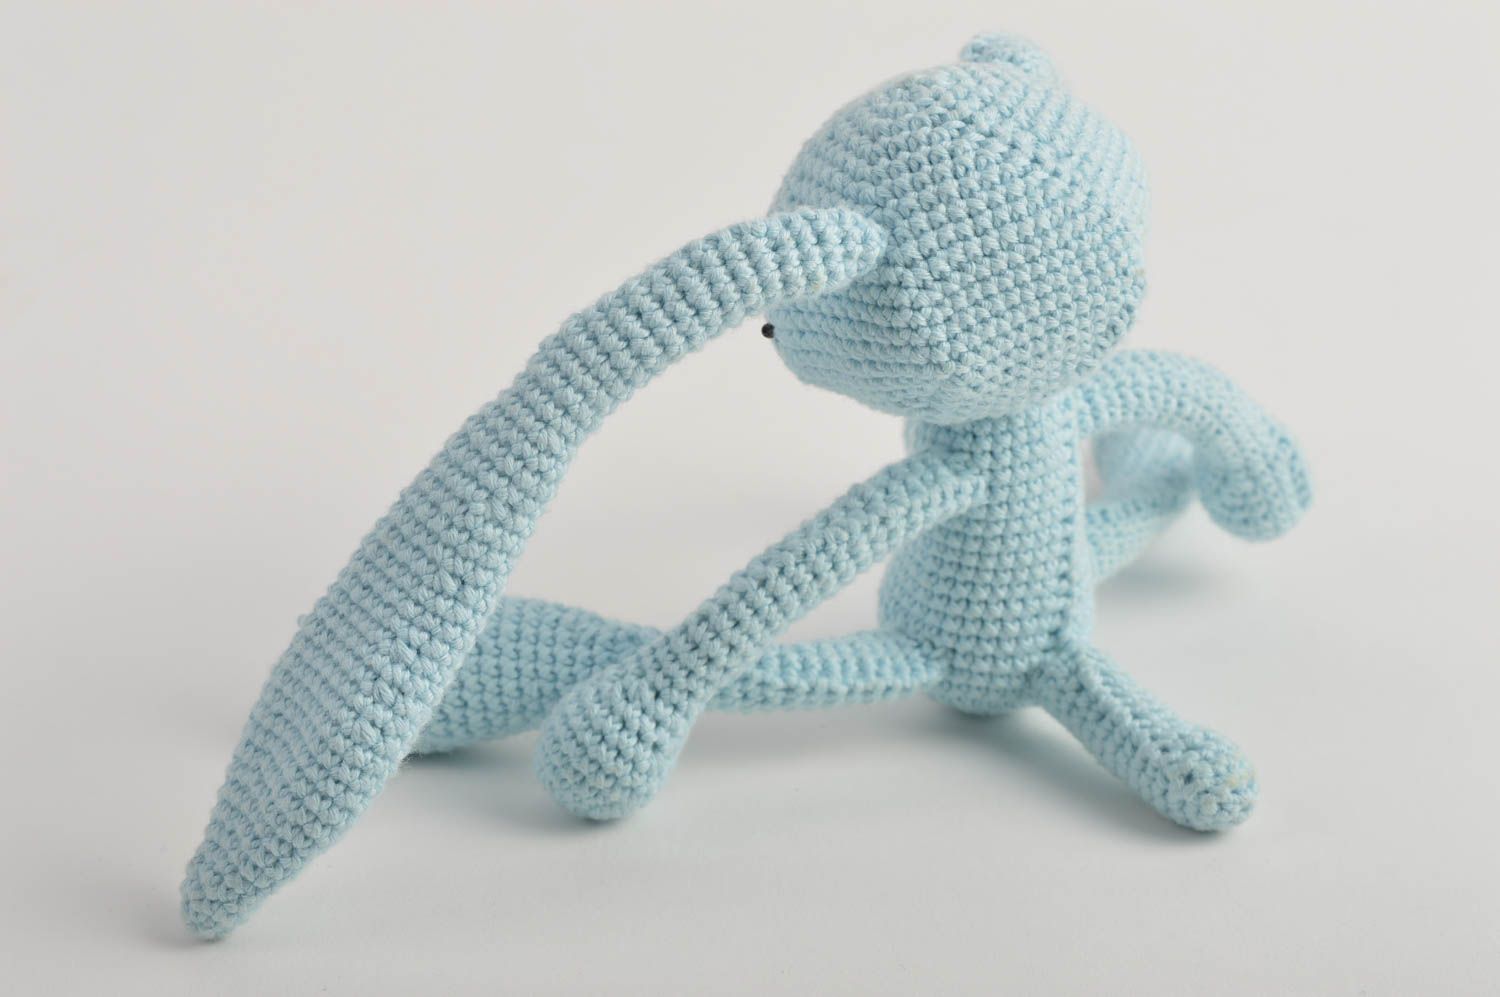 Beautiful handmade crochet toy childrens toys interior decorating gifts for kids photo 4